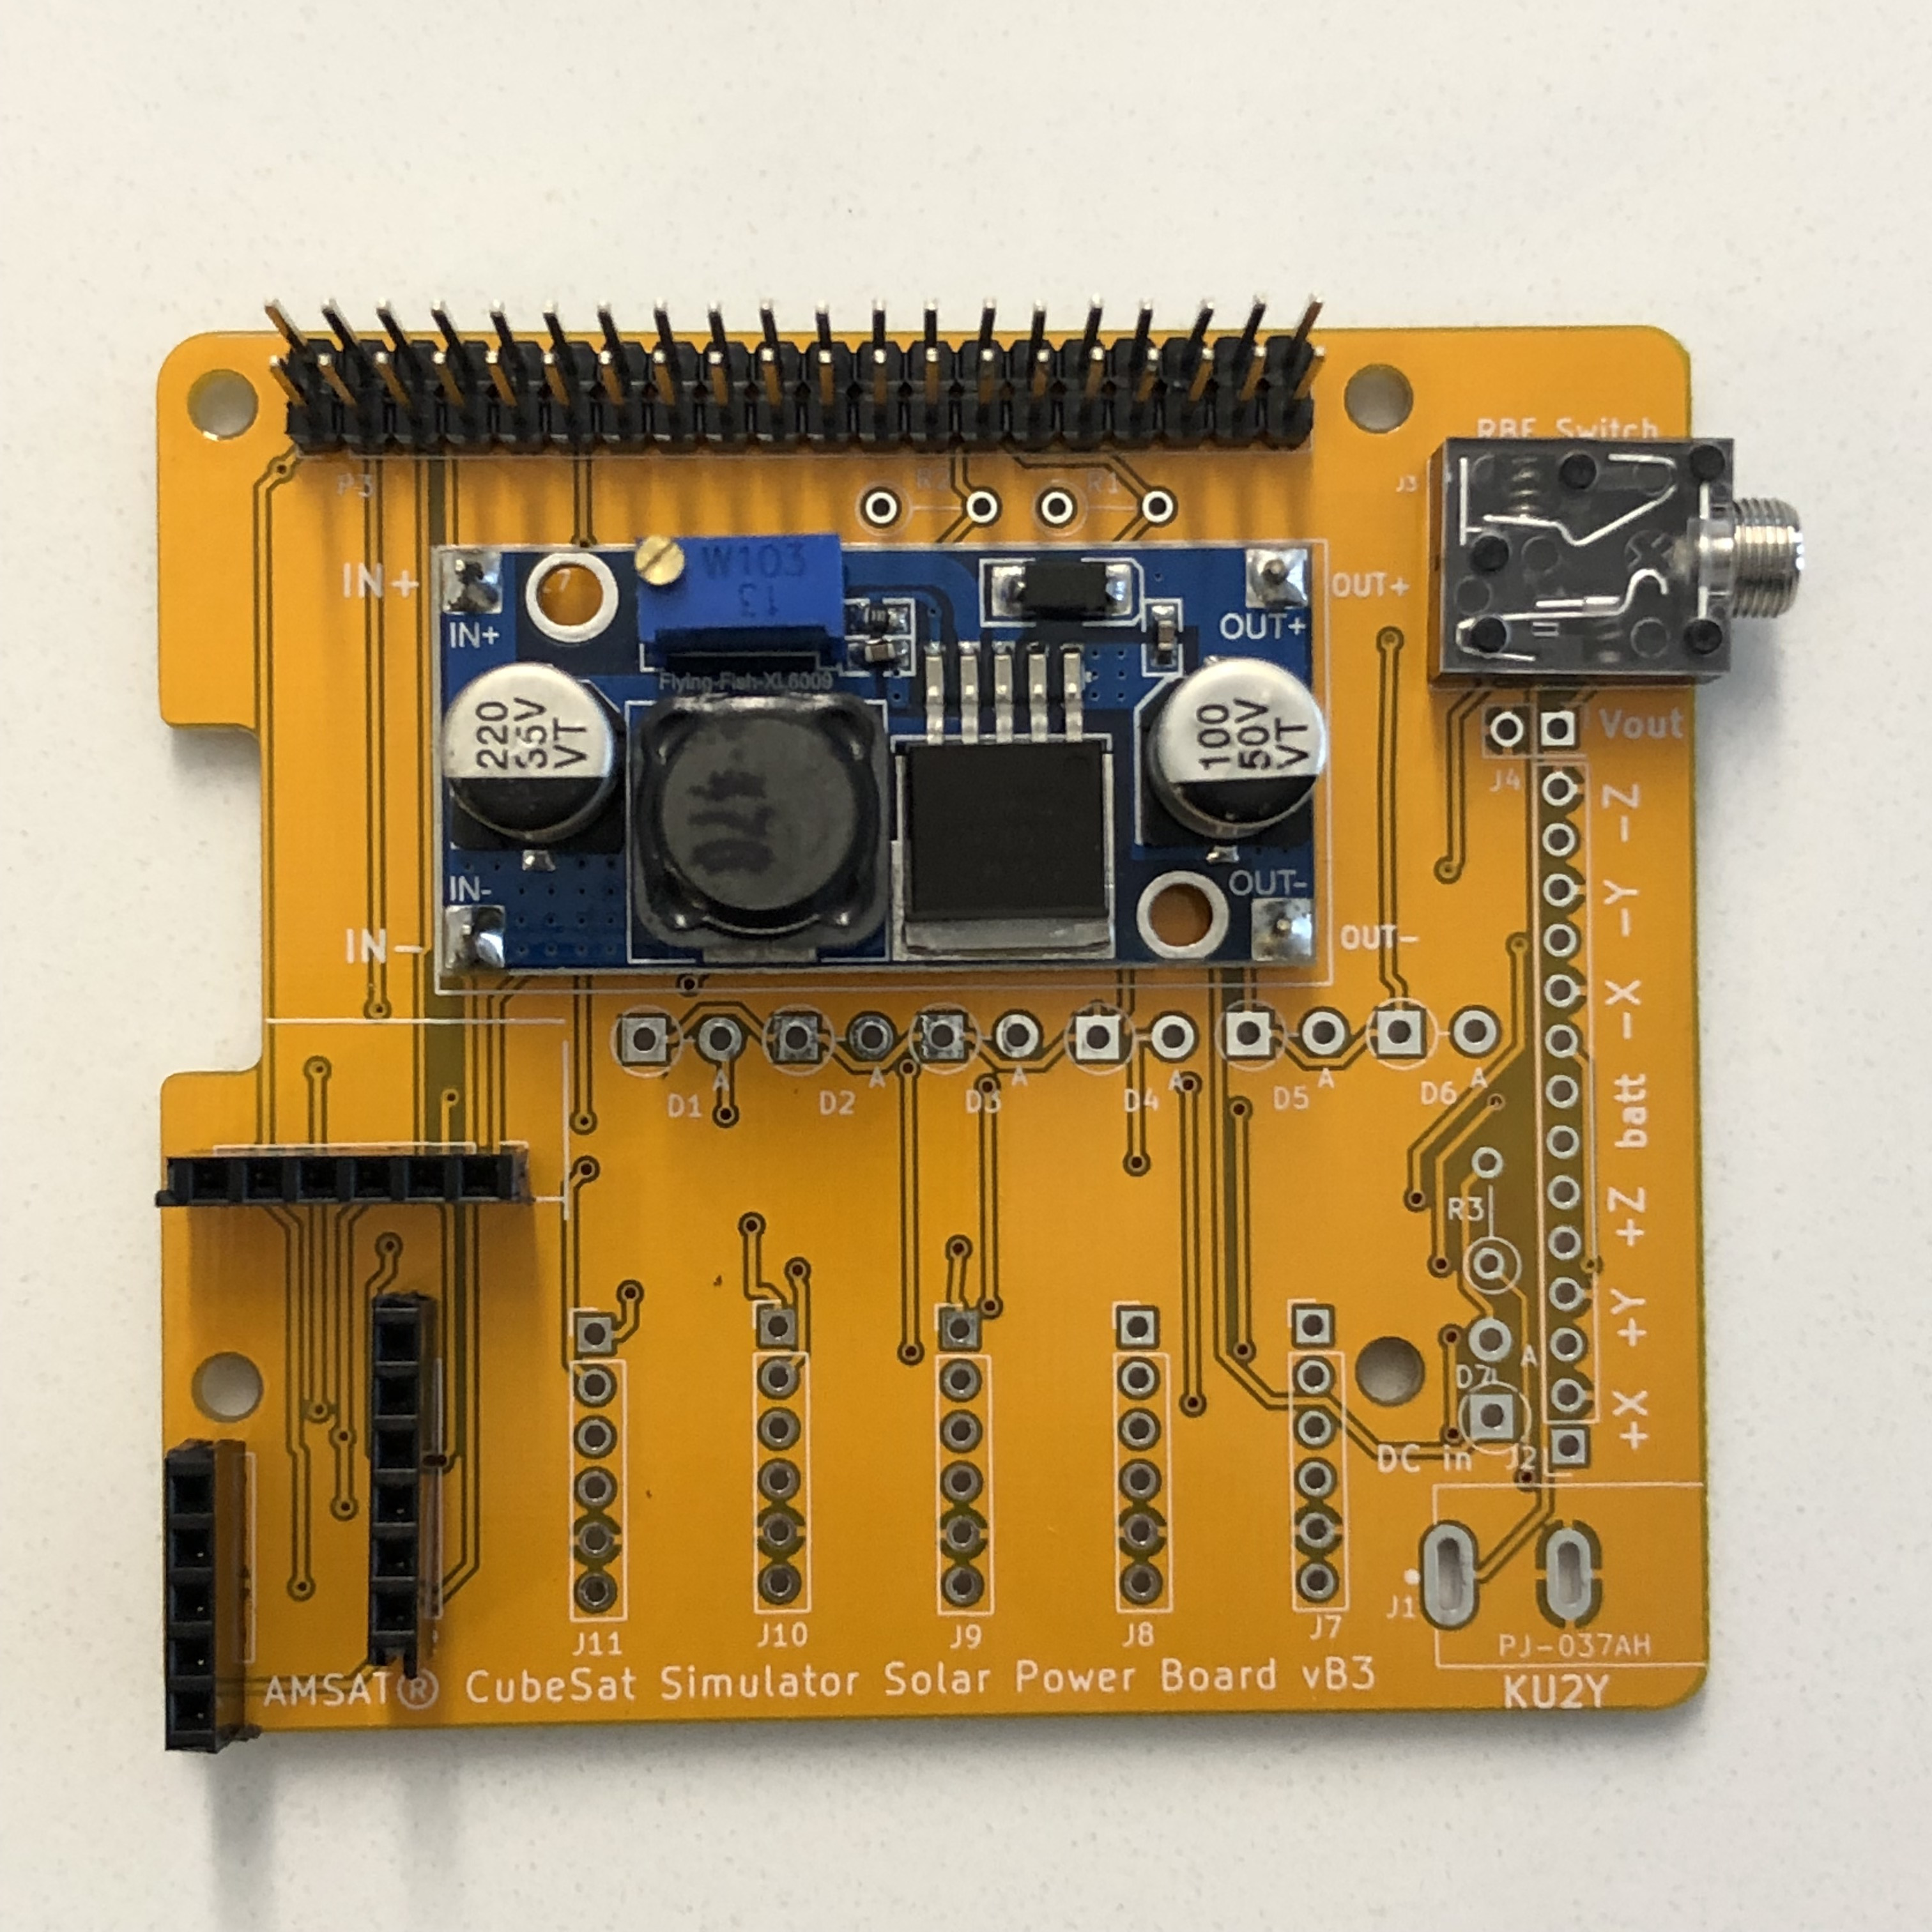 PCB with U1 headers installed